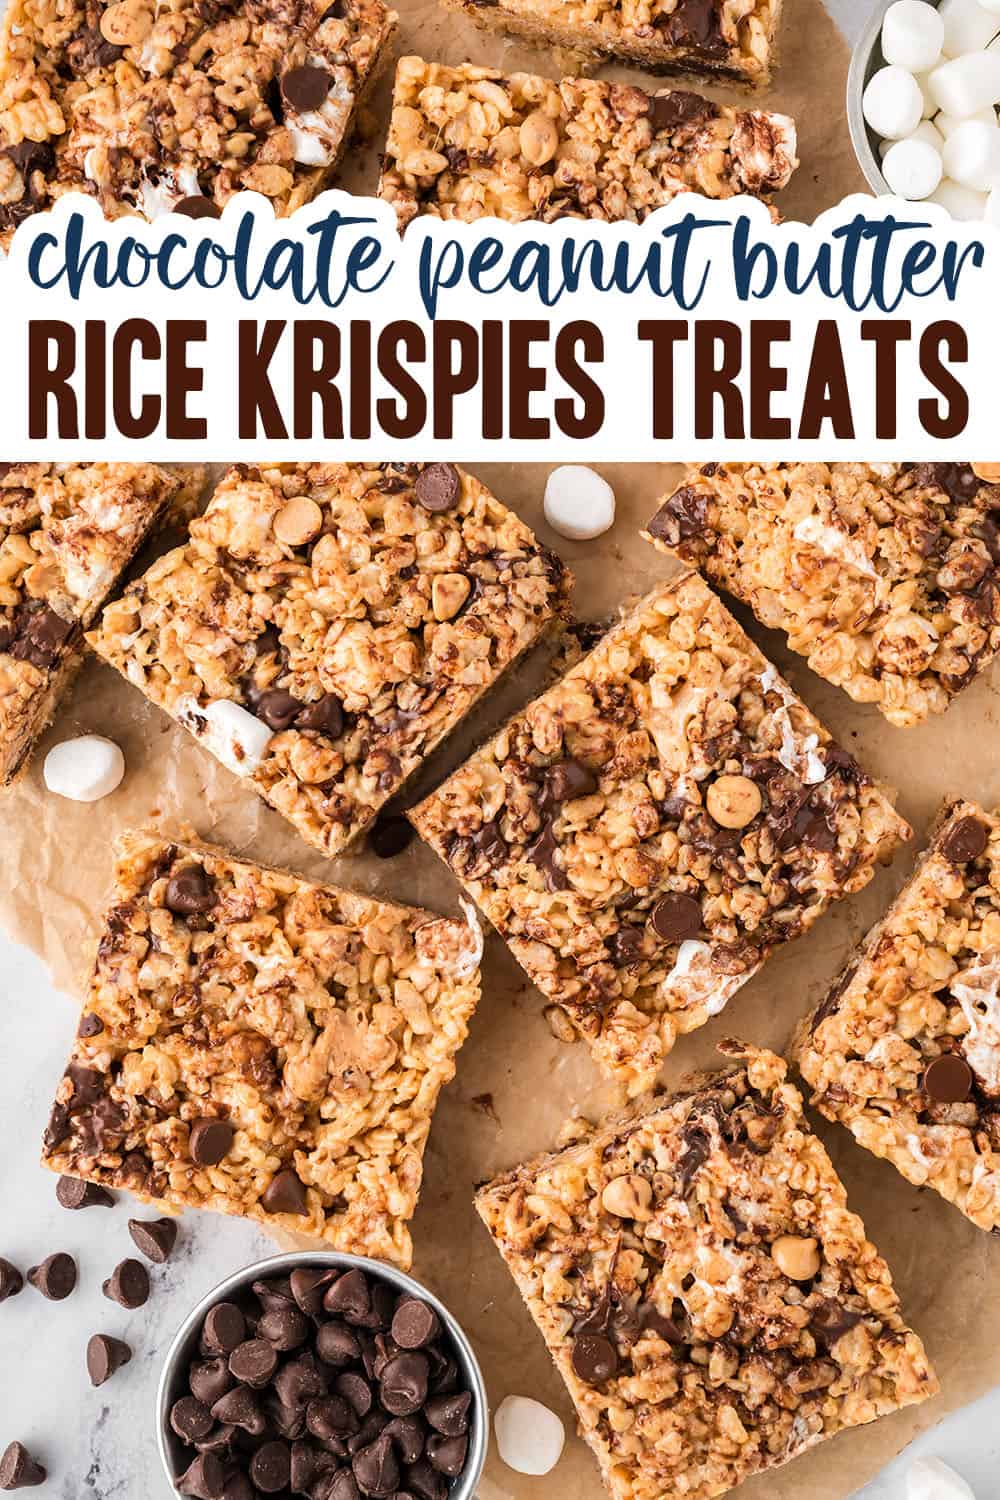 Chocolate peanut butter rice krispies treats on parchment paper with text for pinterest.